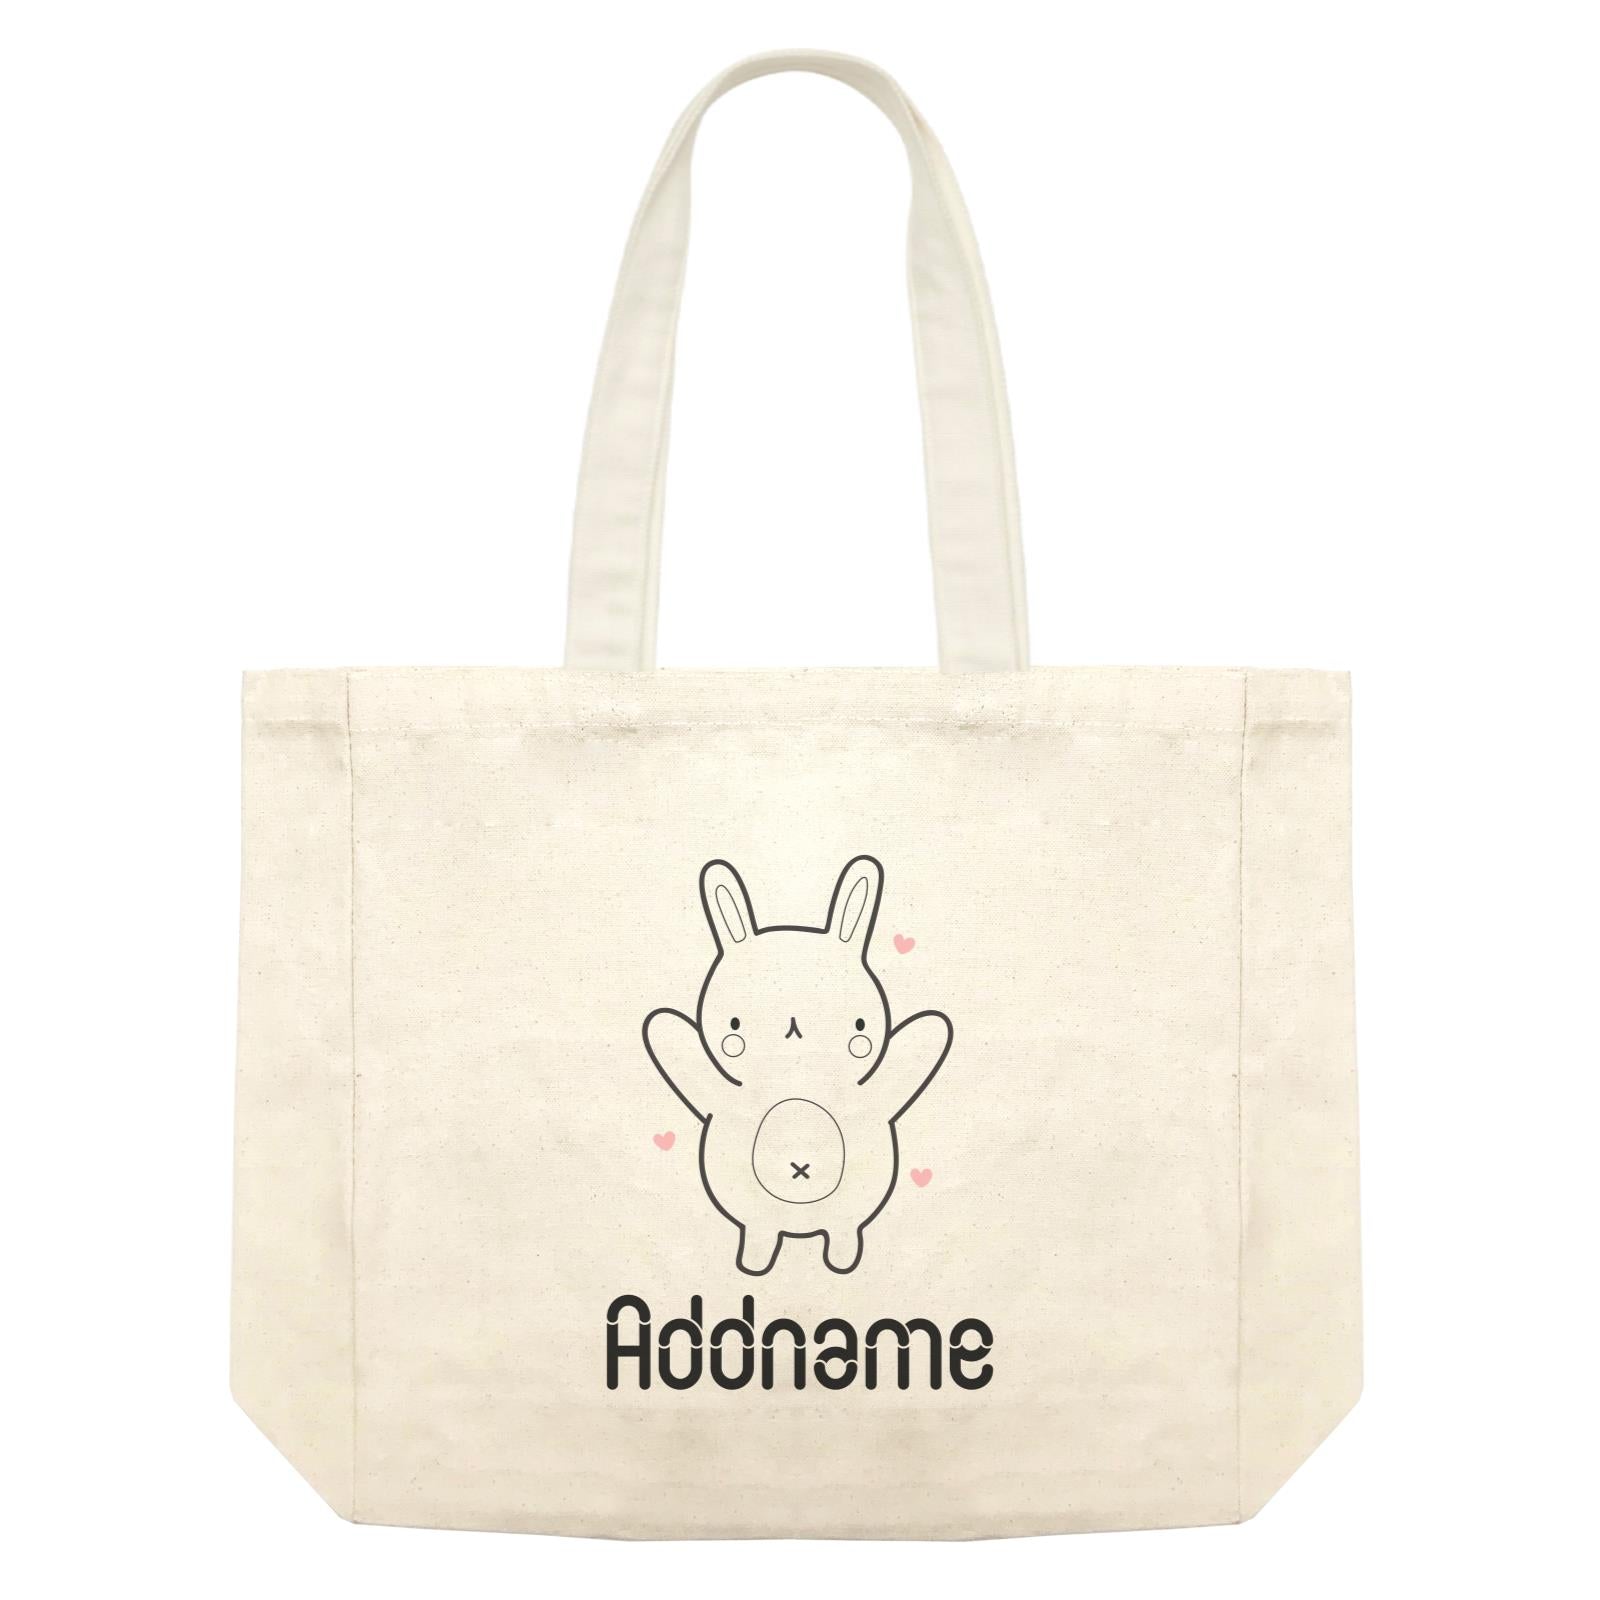 Coloring Outline Cute Hand Drawn Animals Cute Rabbit Addname Shopping Bag